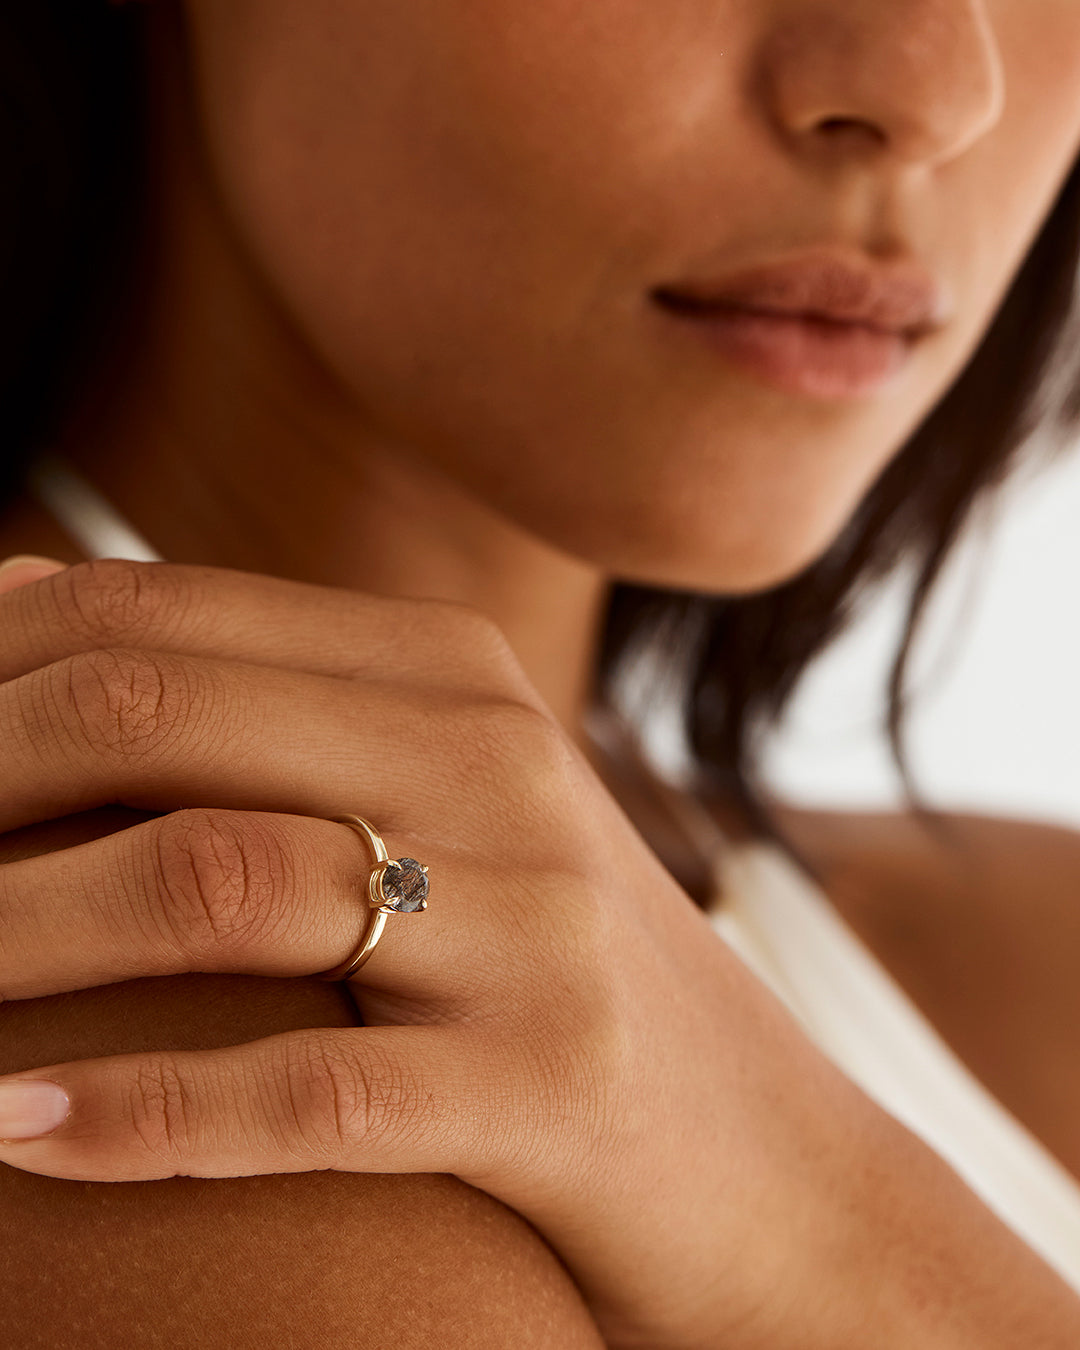 A model wears a round solitaire engagement ring with a tourmalinated quartz